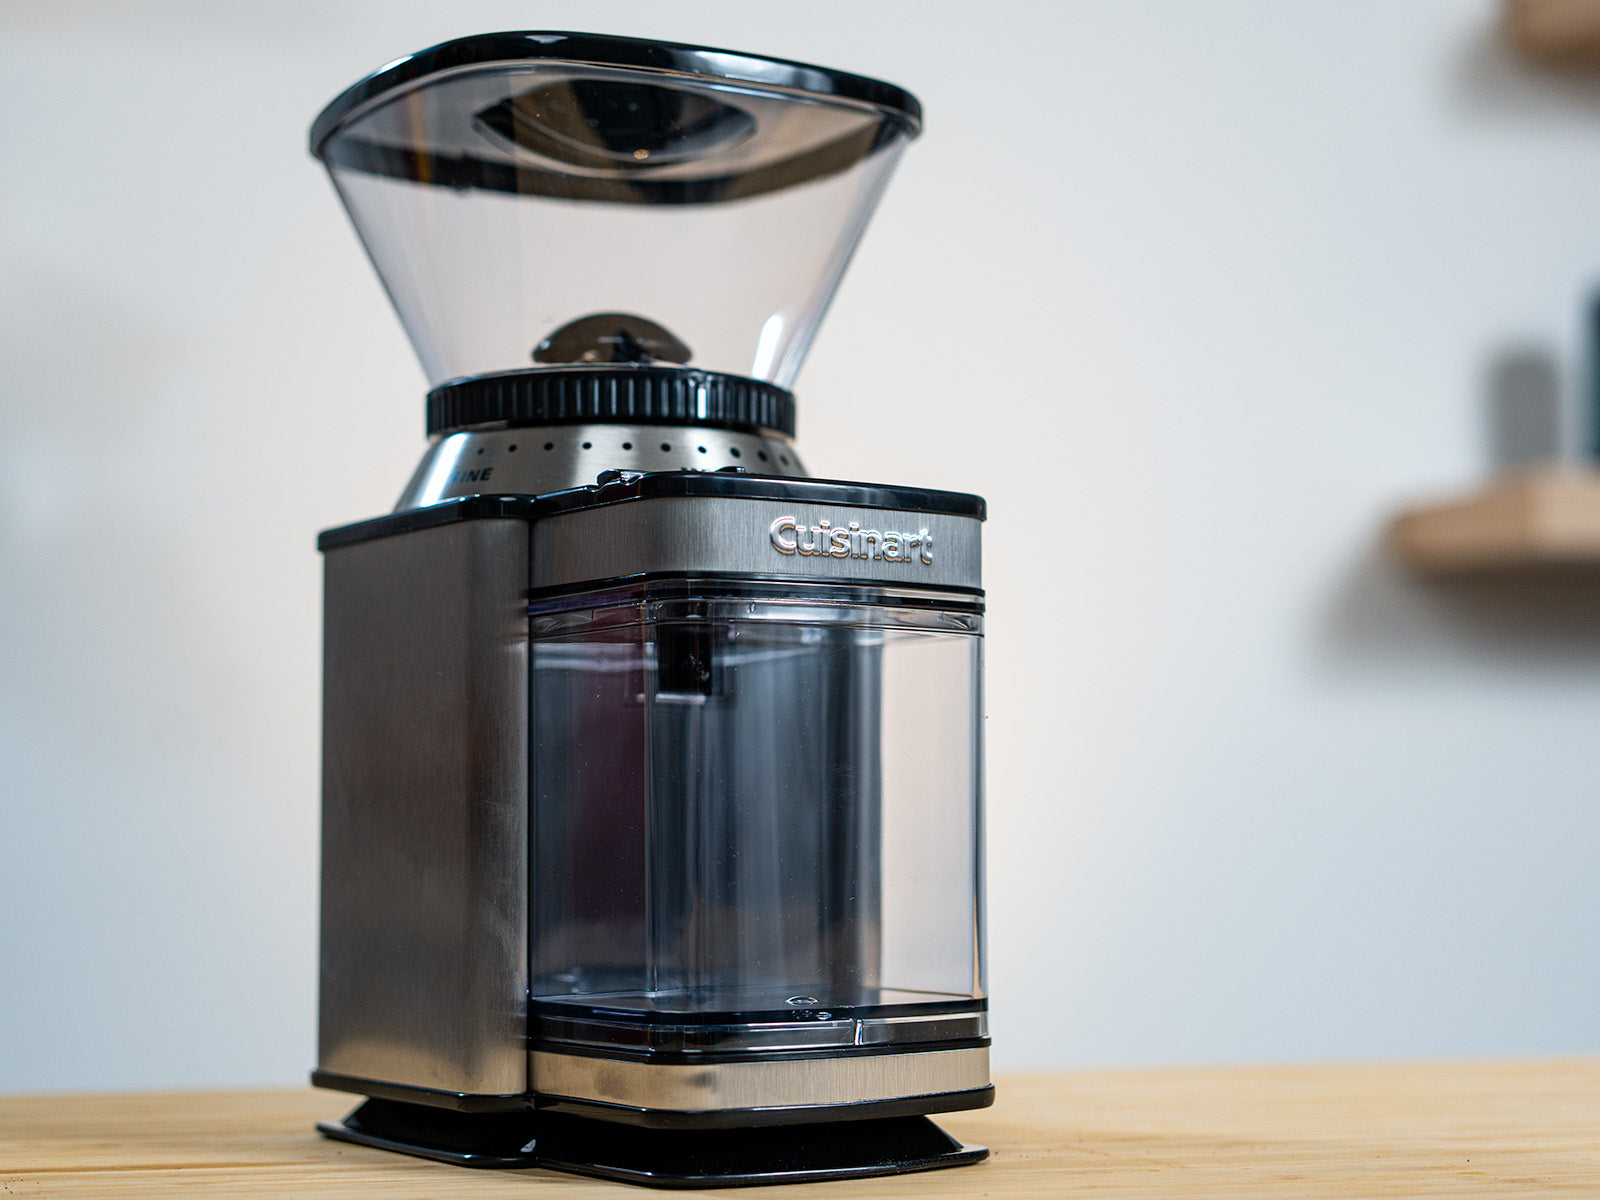 Cuisinart automatic coffee grinder